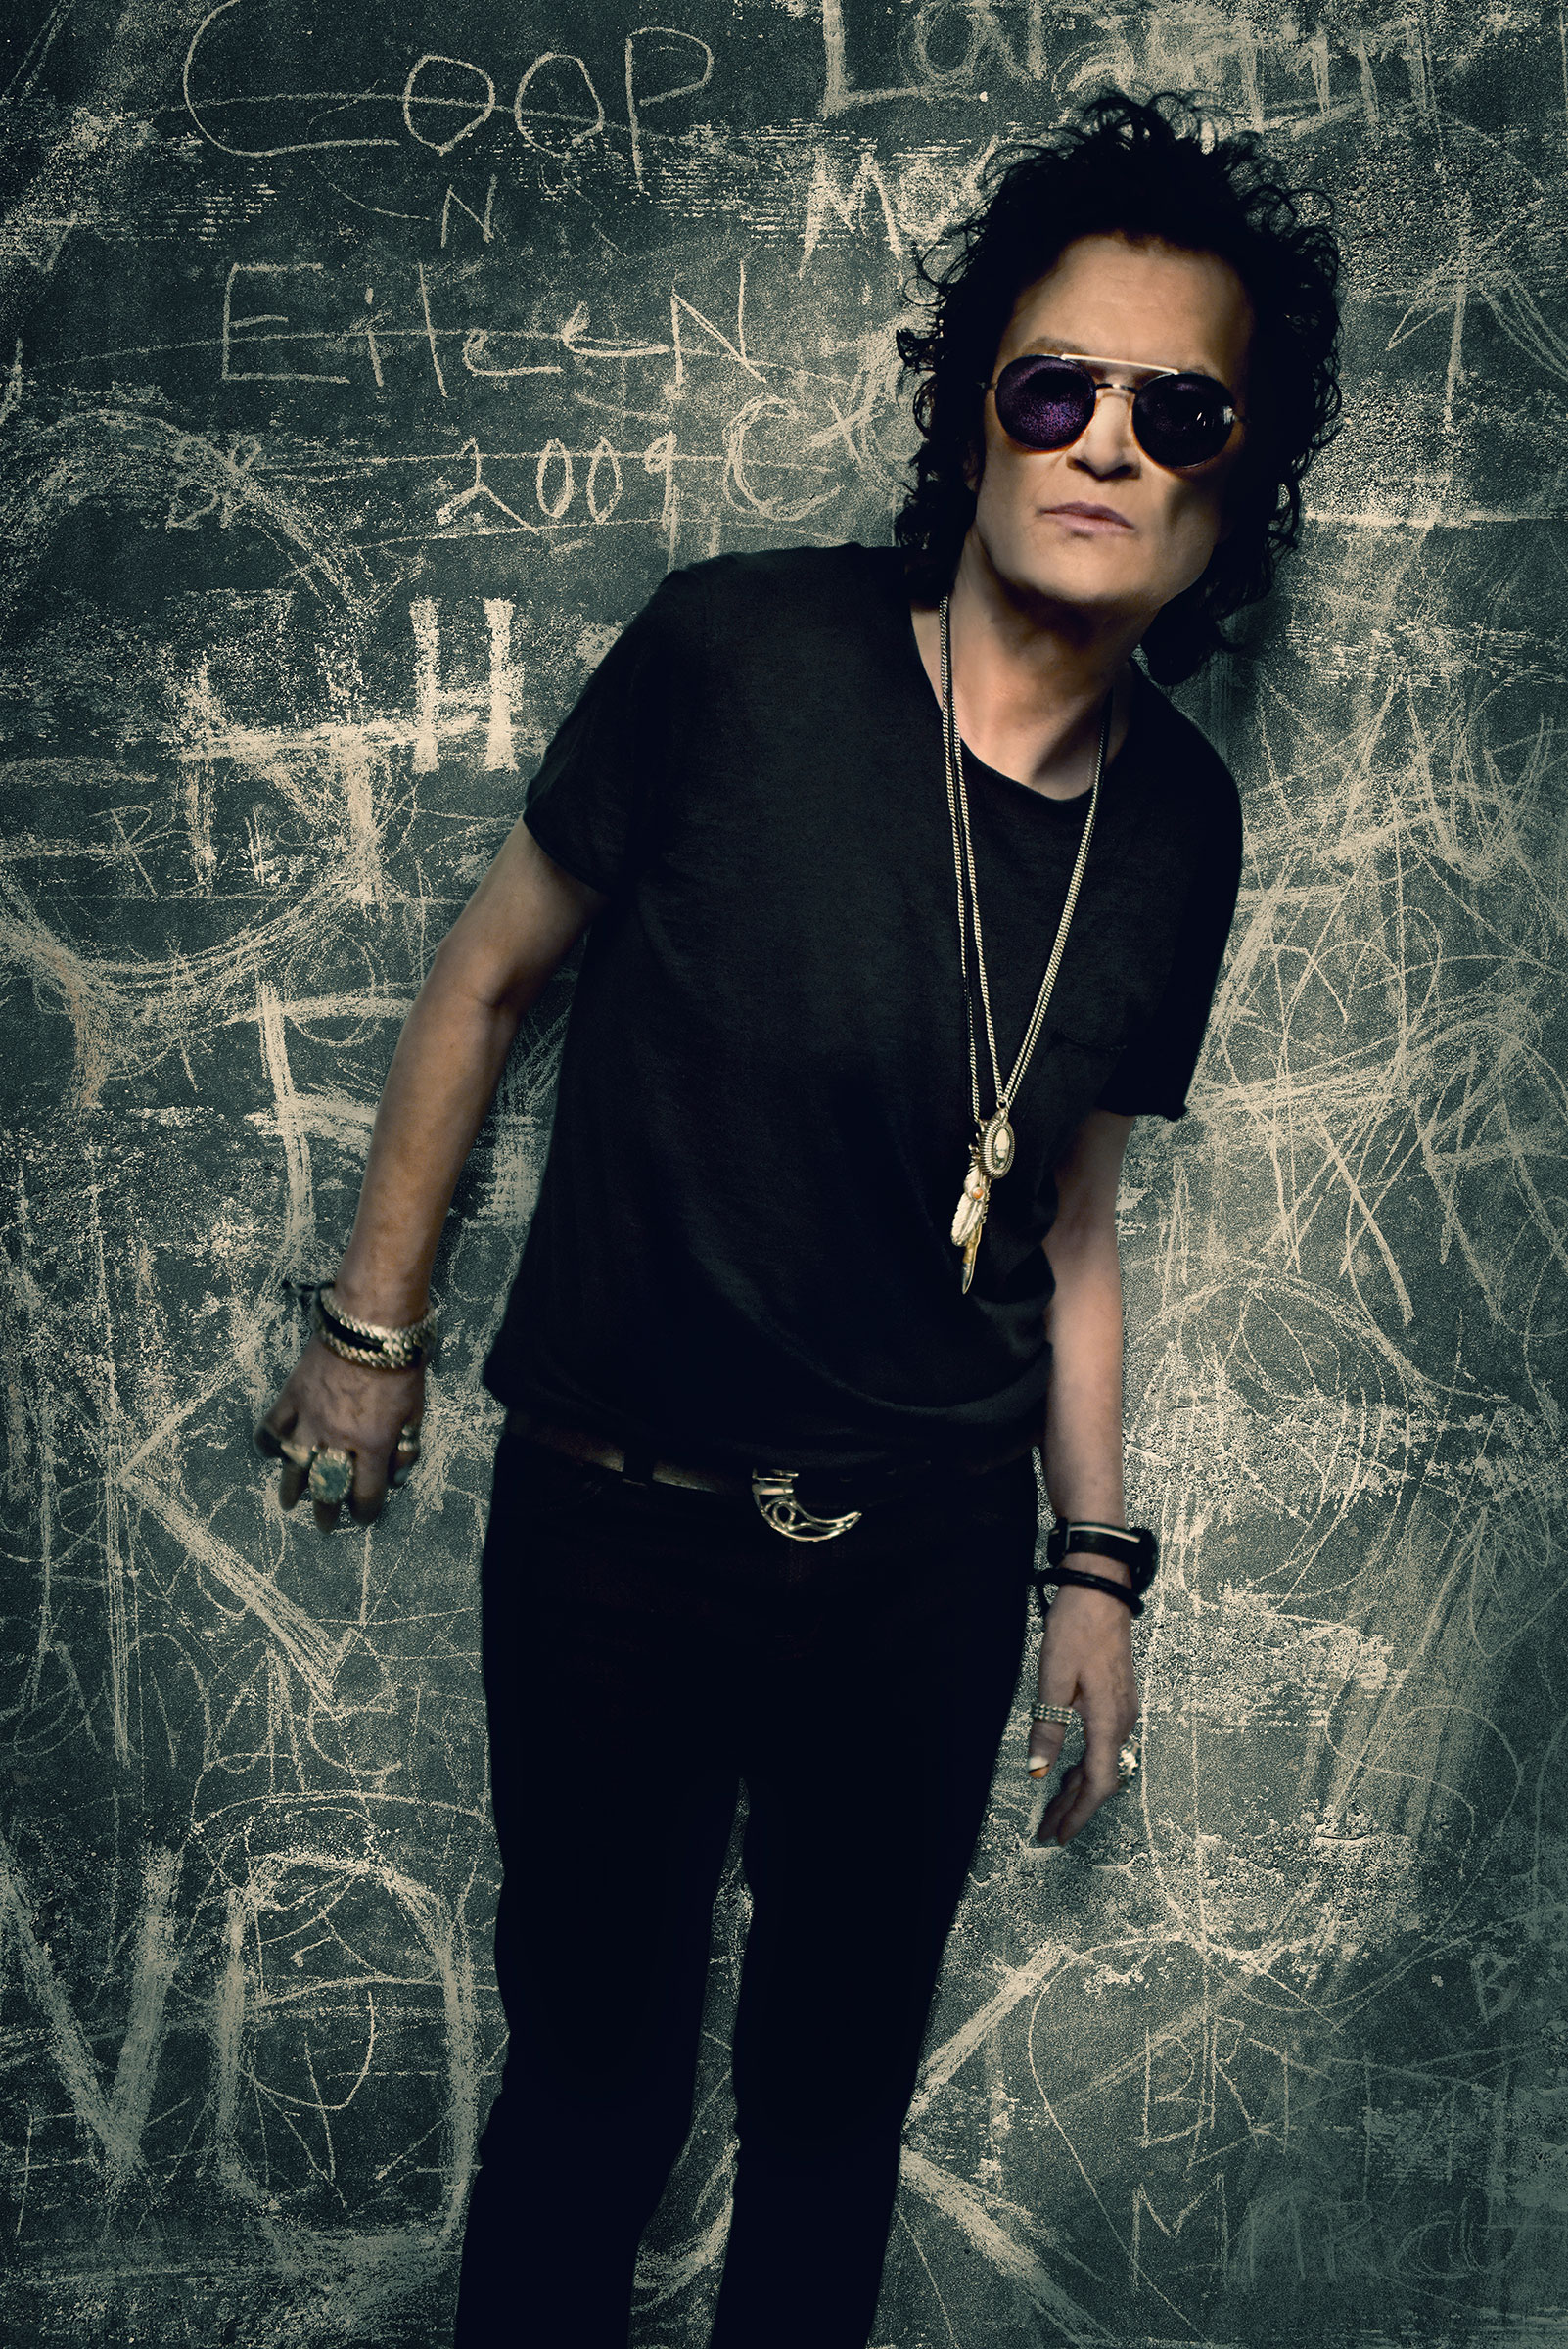 Glenn Hughes, The Voice of Rock, Continues to Resonate Sound & Vision